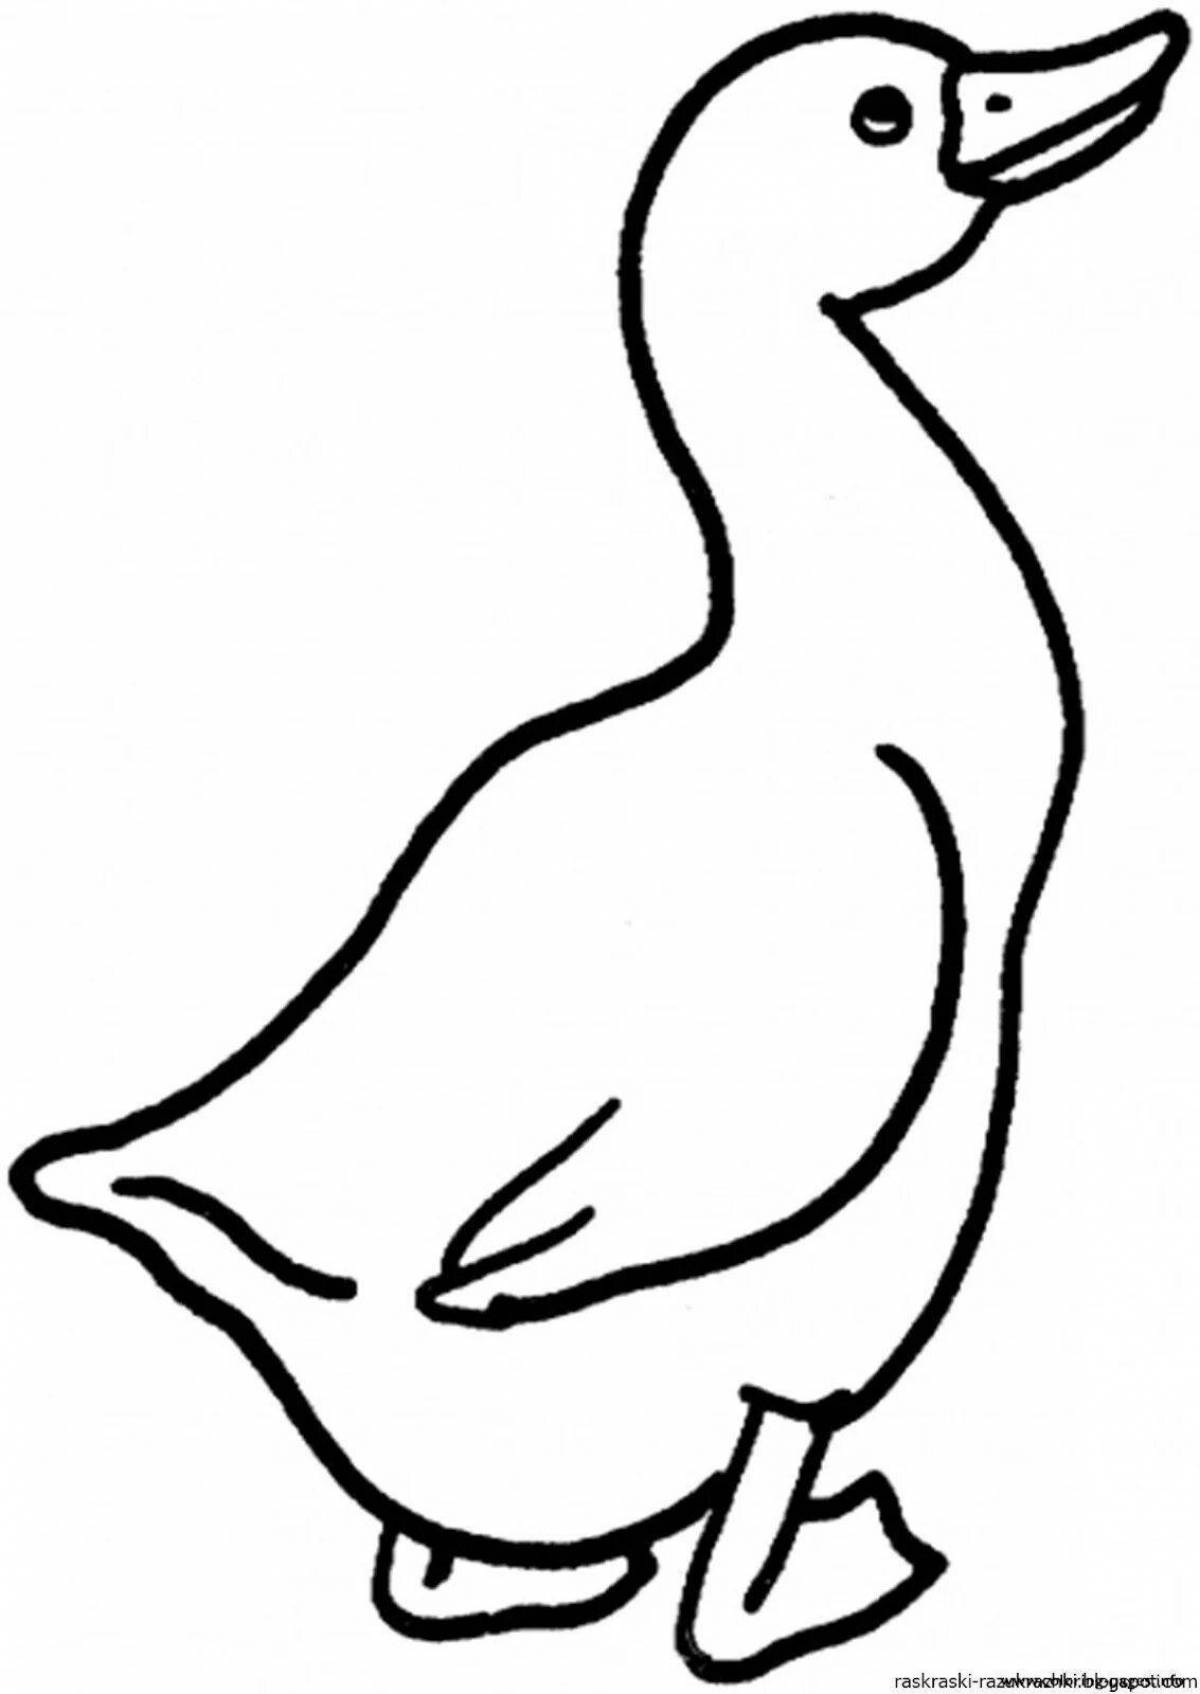 Creative goose coloring book for kids